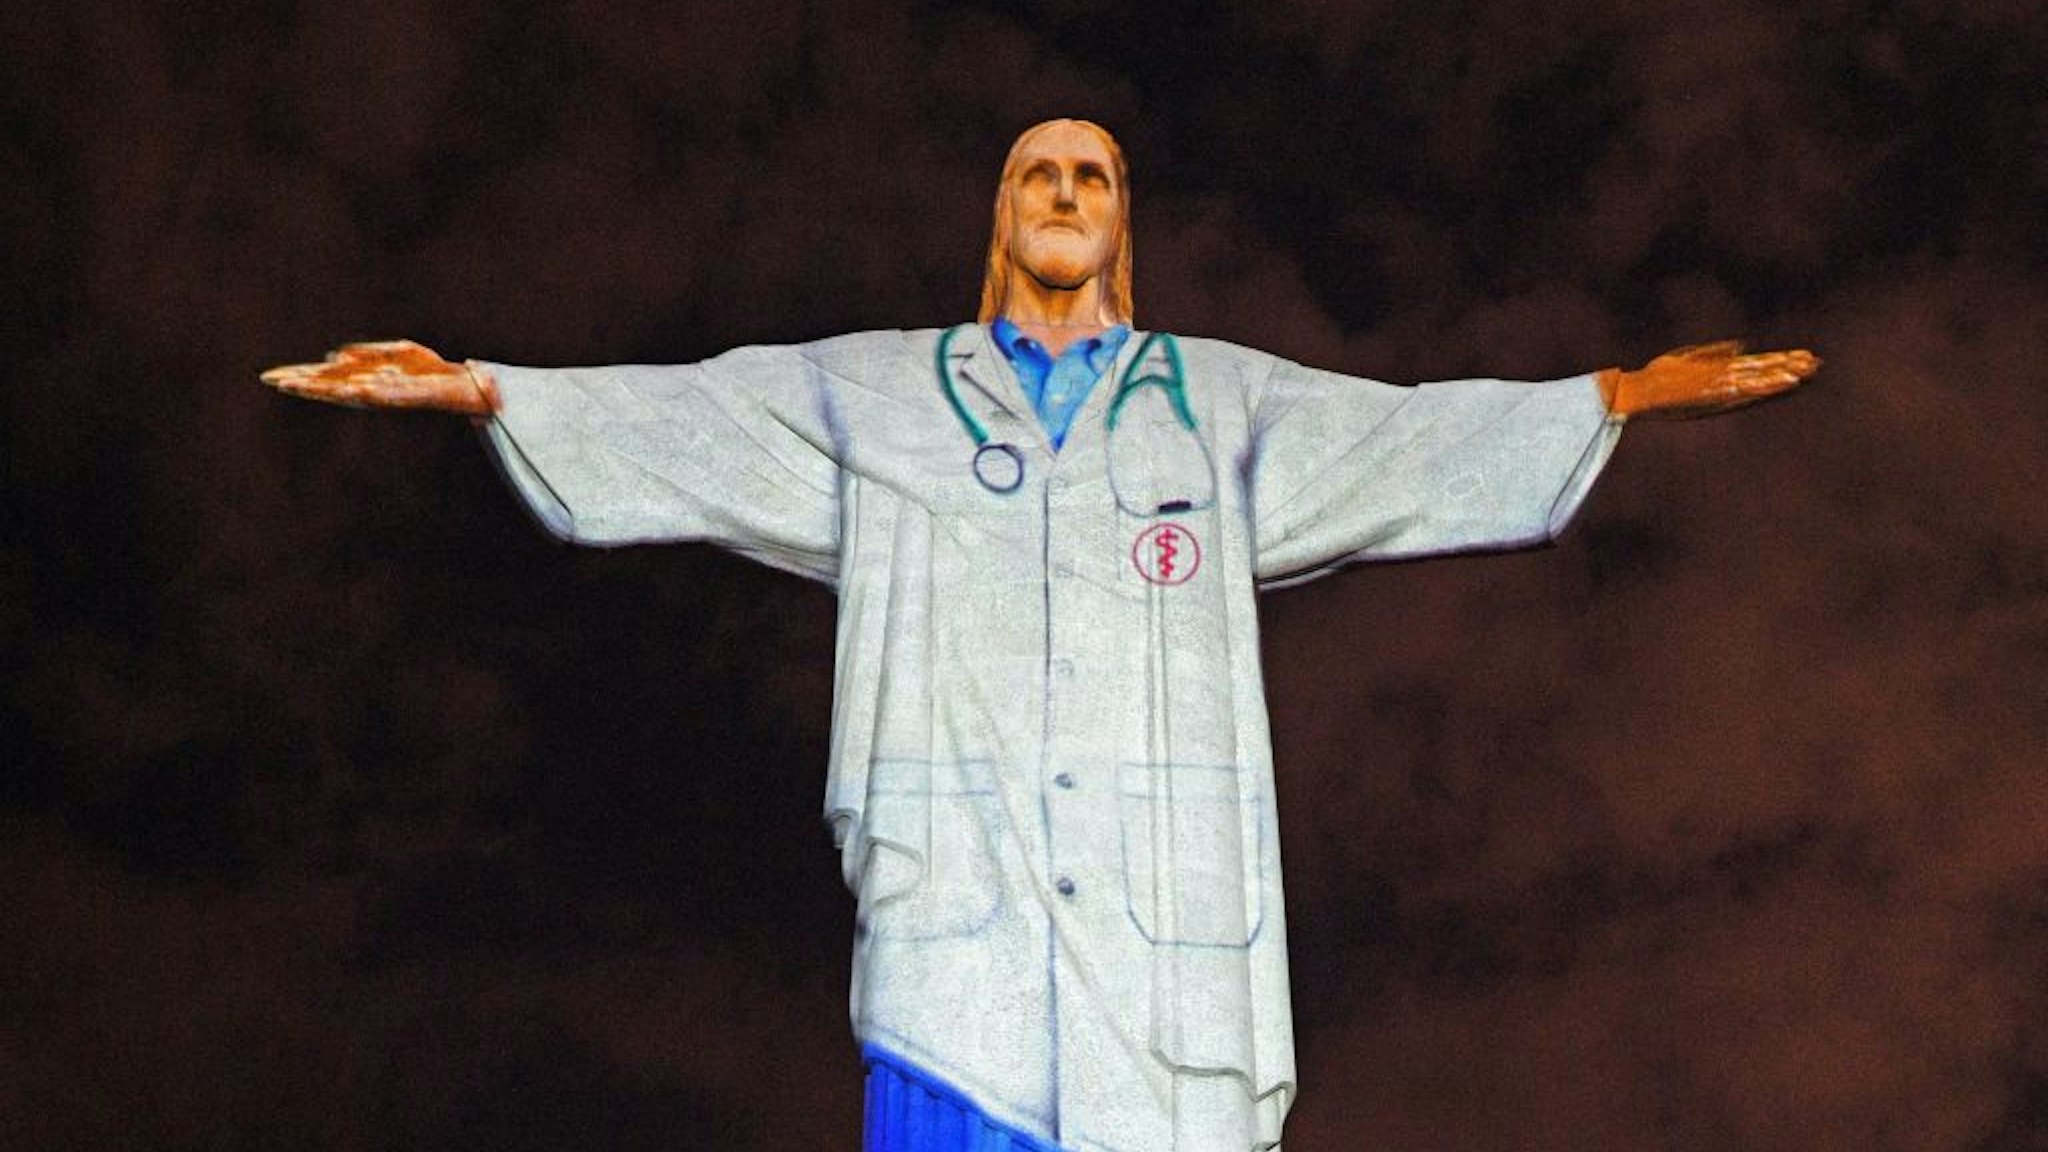 TOPSHOT - View of the world famous Christ the Redeemer statue on Easter day with a doctor's uniform projected on it in honour of all the medical staff fighting the COVID-19 coronavirus pandemic worldwide in Rio de Janeiro, Brazil on April 12, 2020.